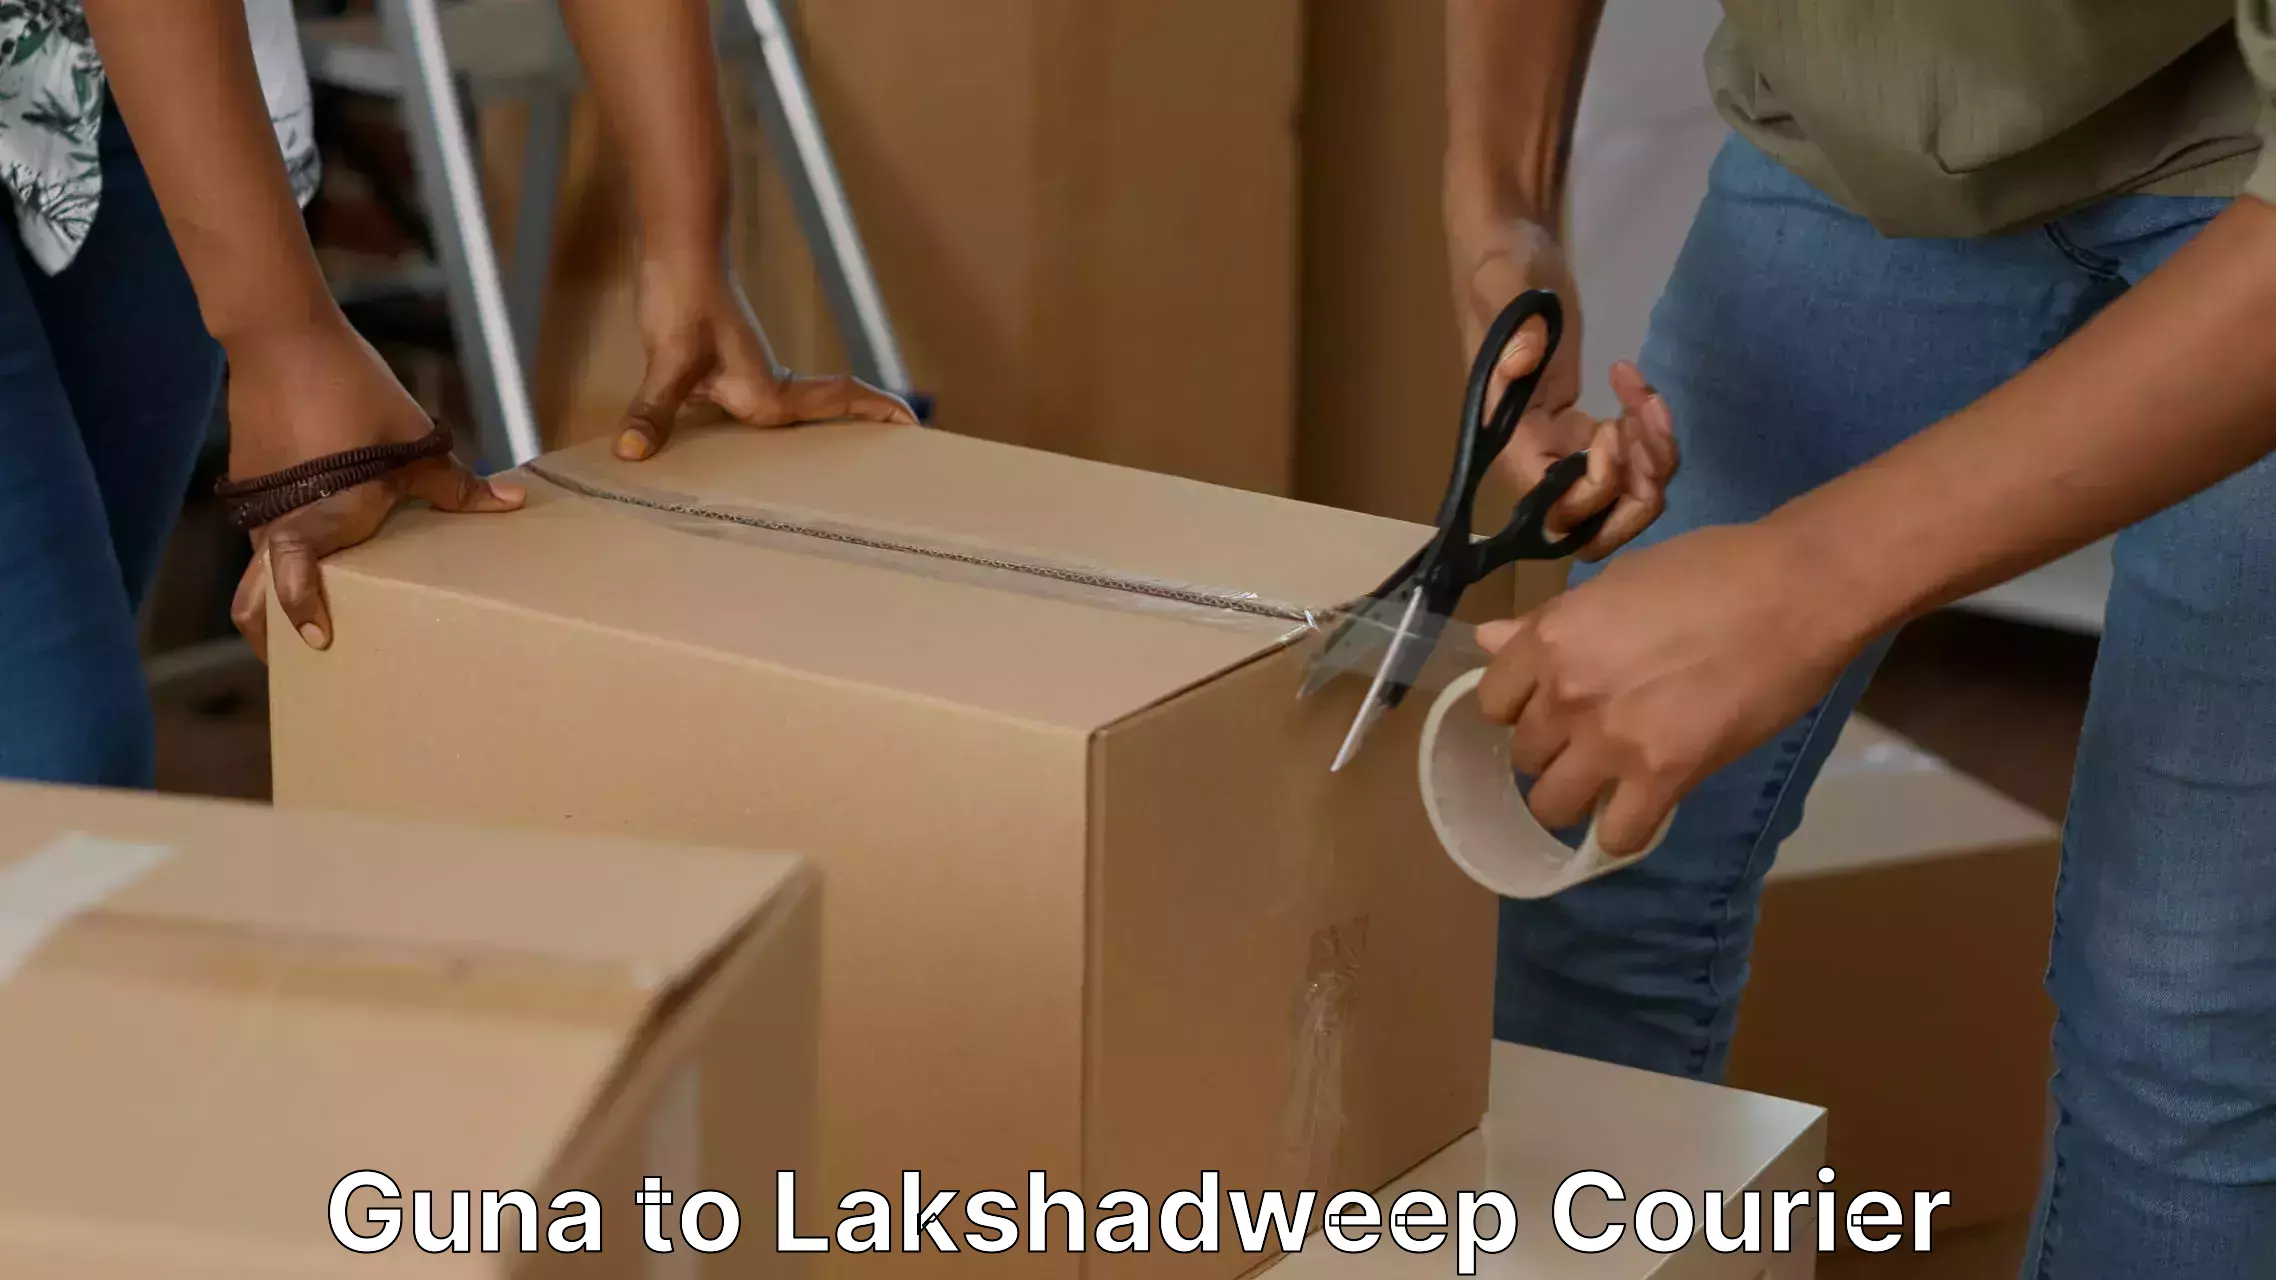 Professional relocation services Guna to Lakshadweep